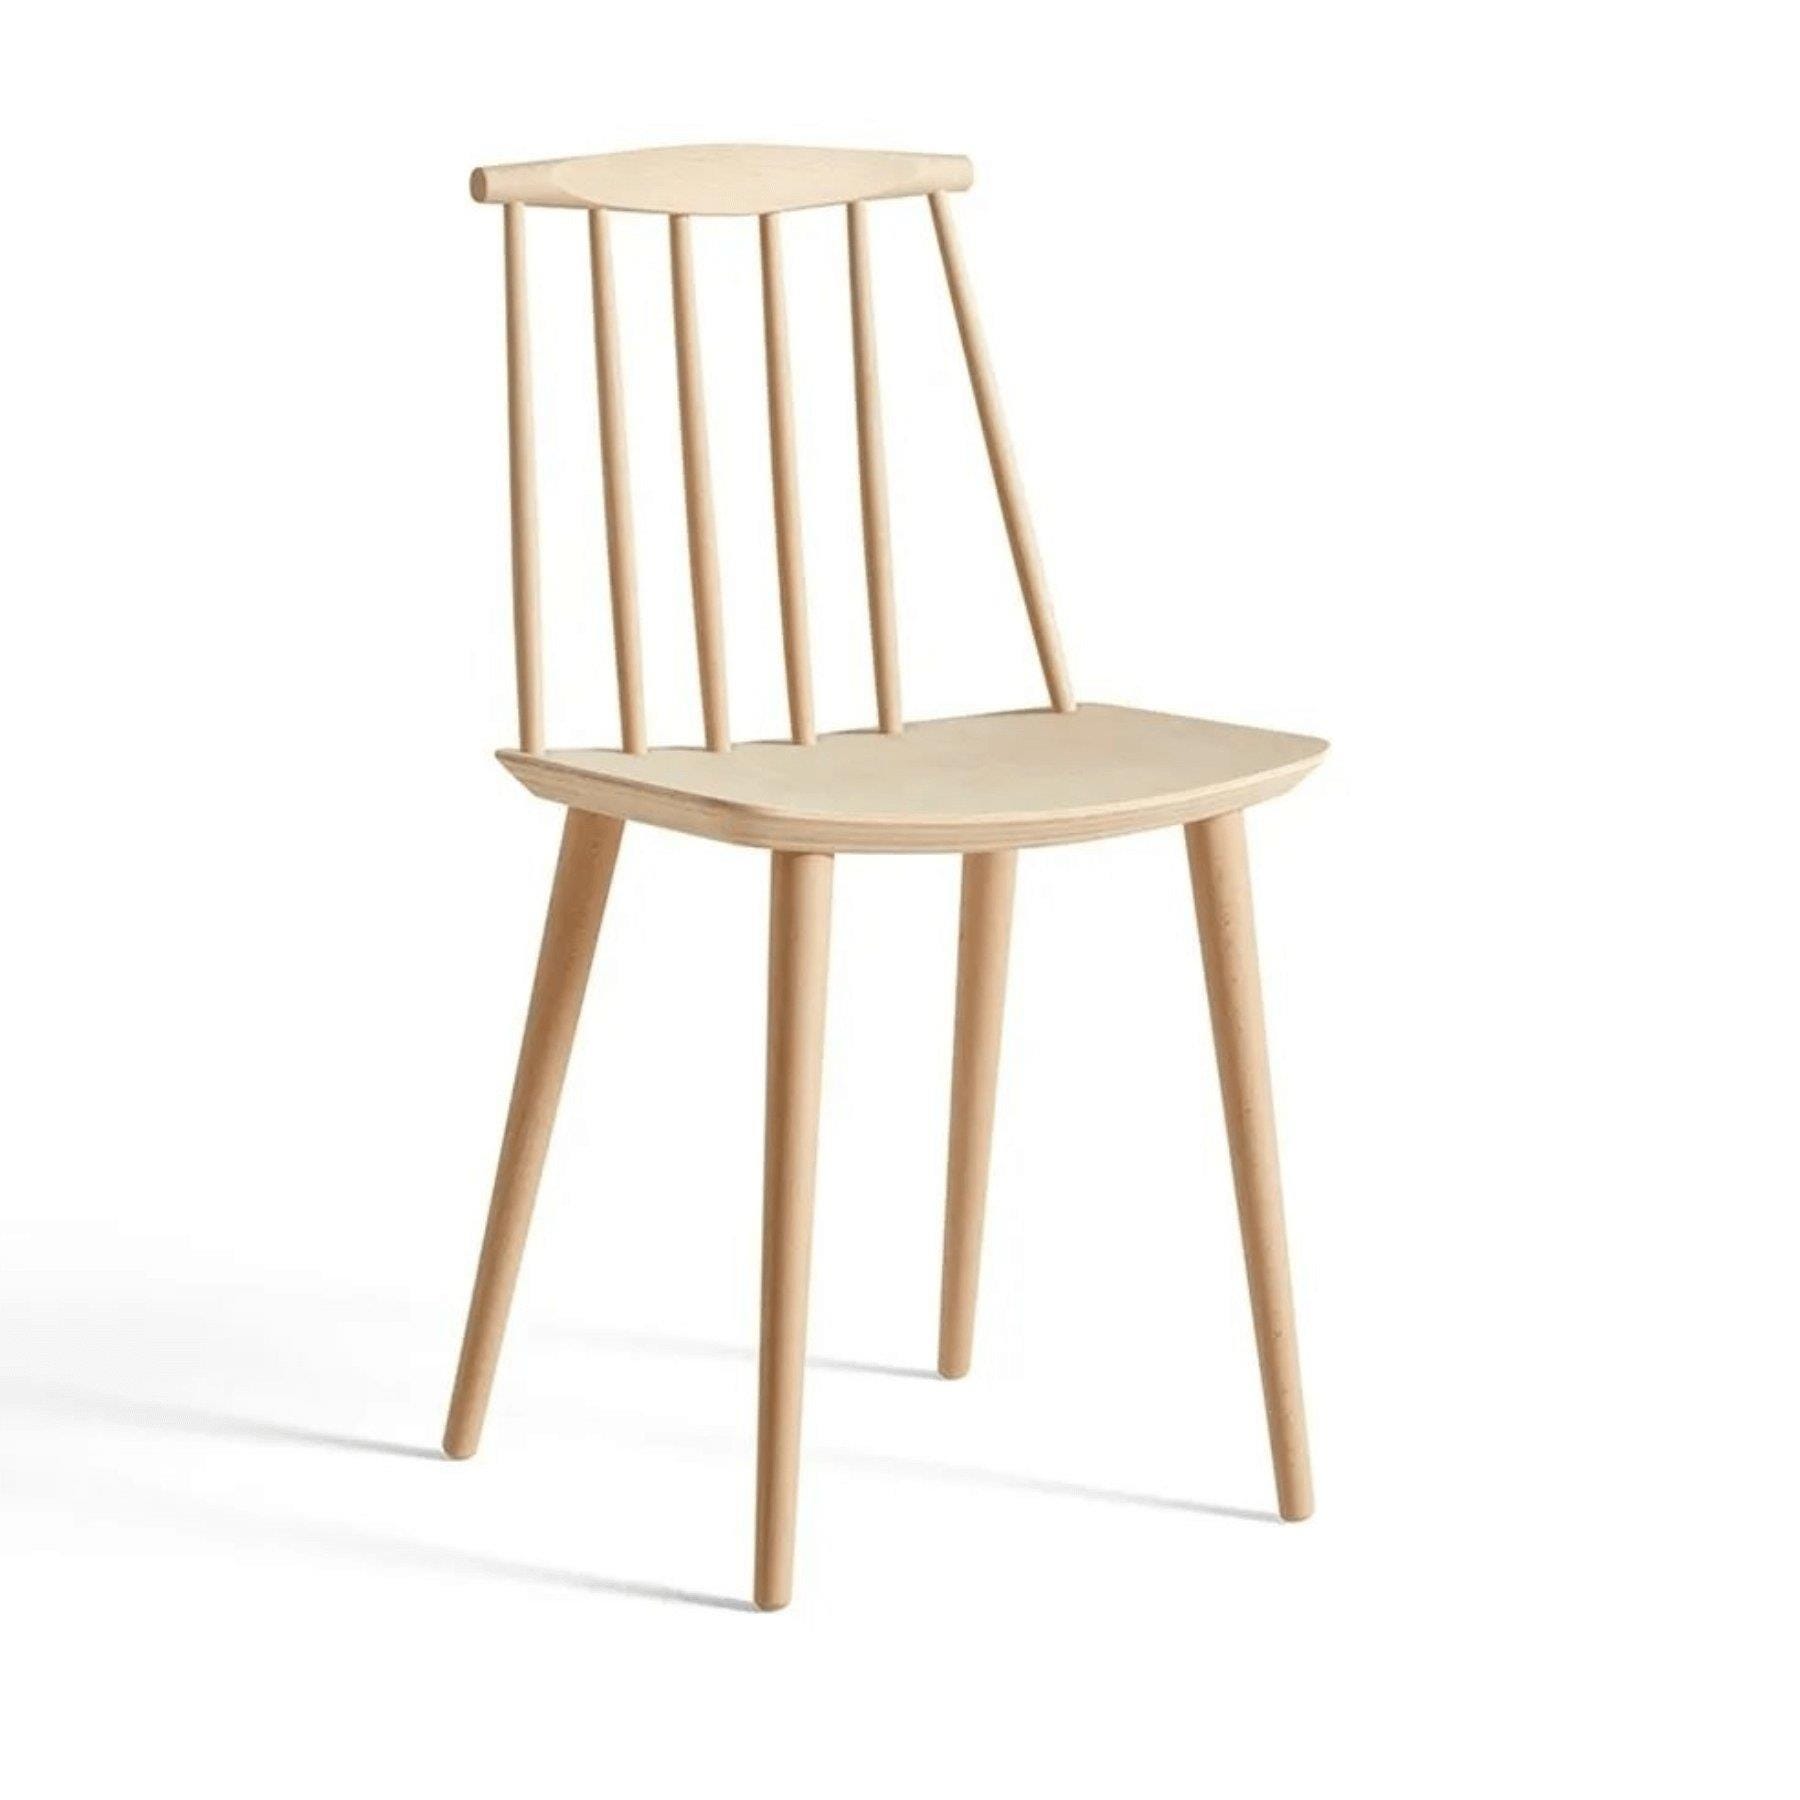 Hay Jseries 77 Dining Chair Oiled Oak Felt Gliders Light Wood Designer Furniture From Holloways Of Ludlow